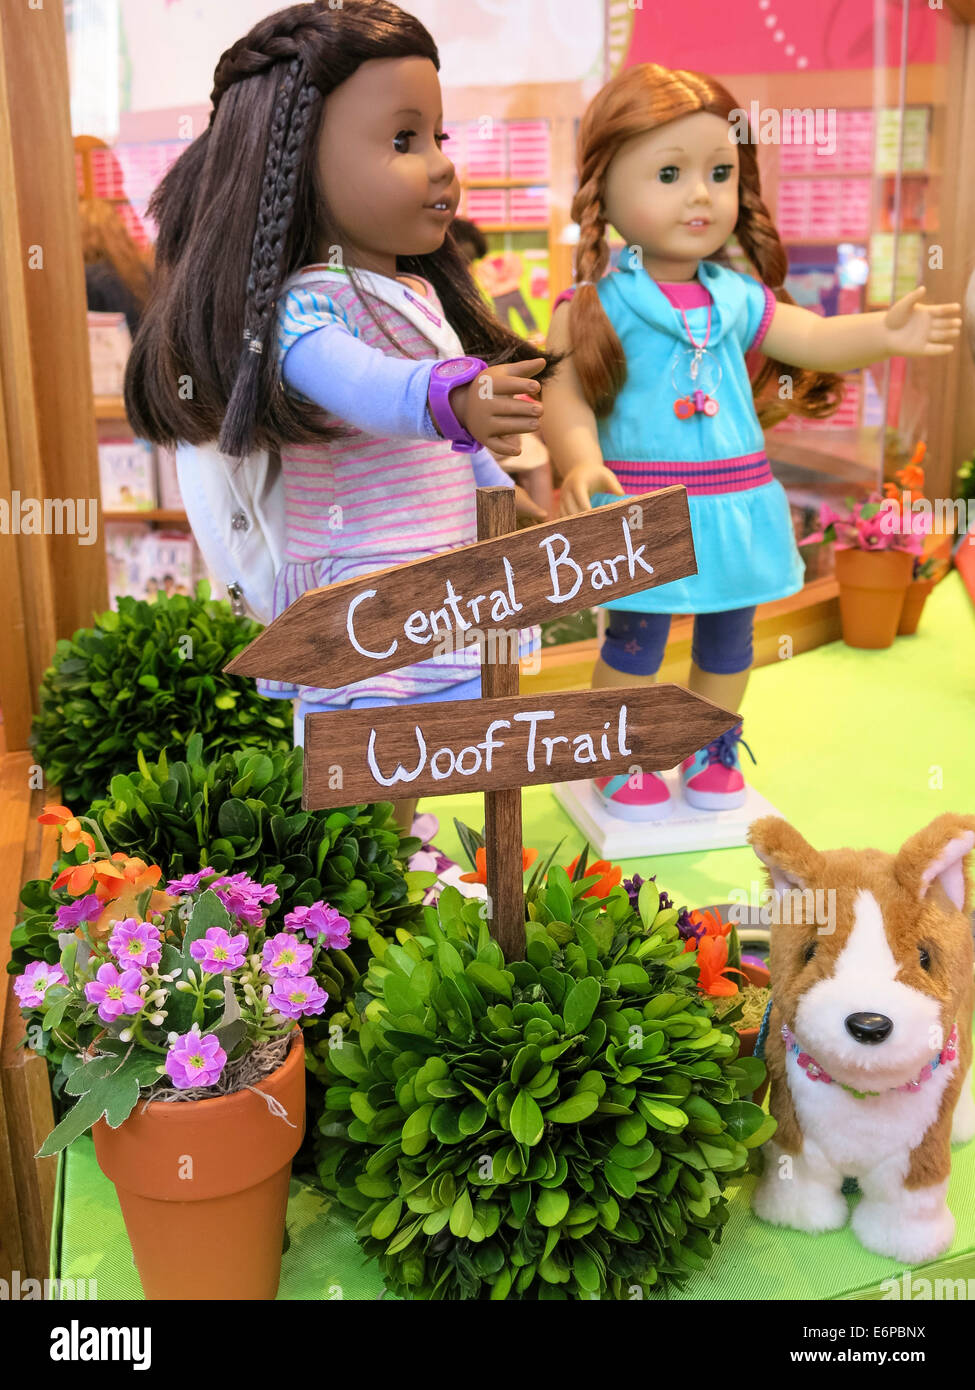 American Girl Place Store Interieur, Fifth Avenue, New York Stockfoto